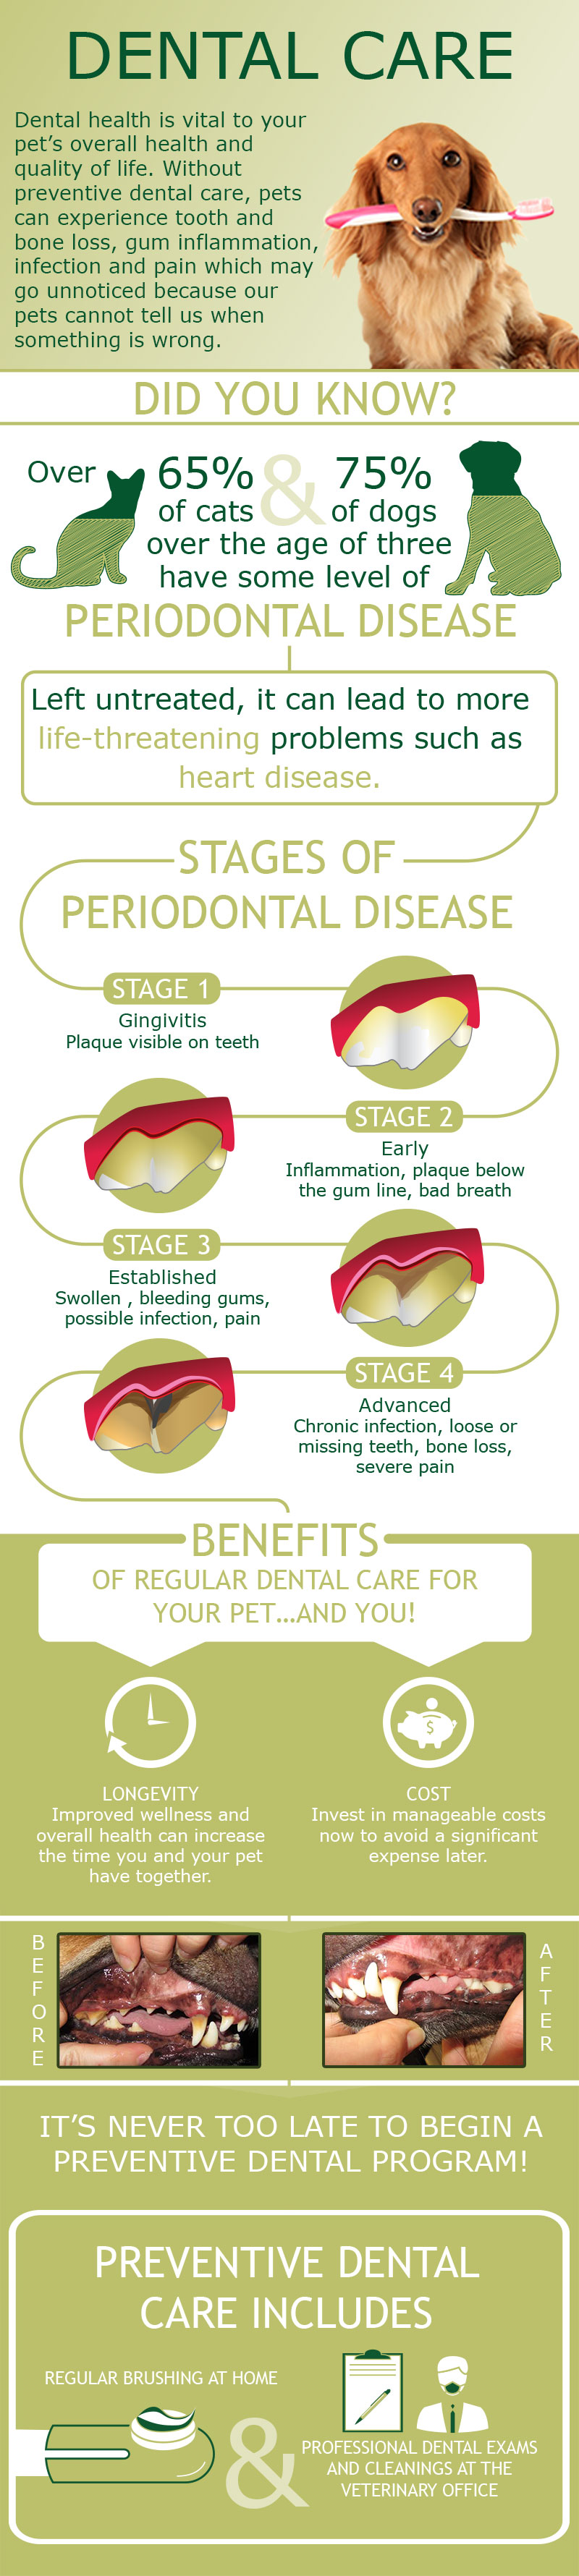 dental care infographic